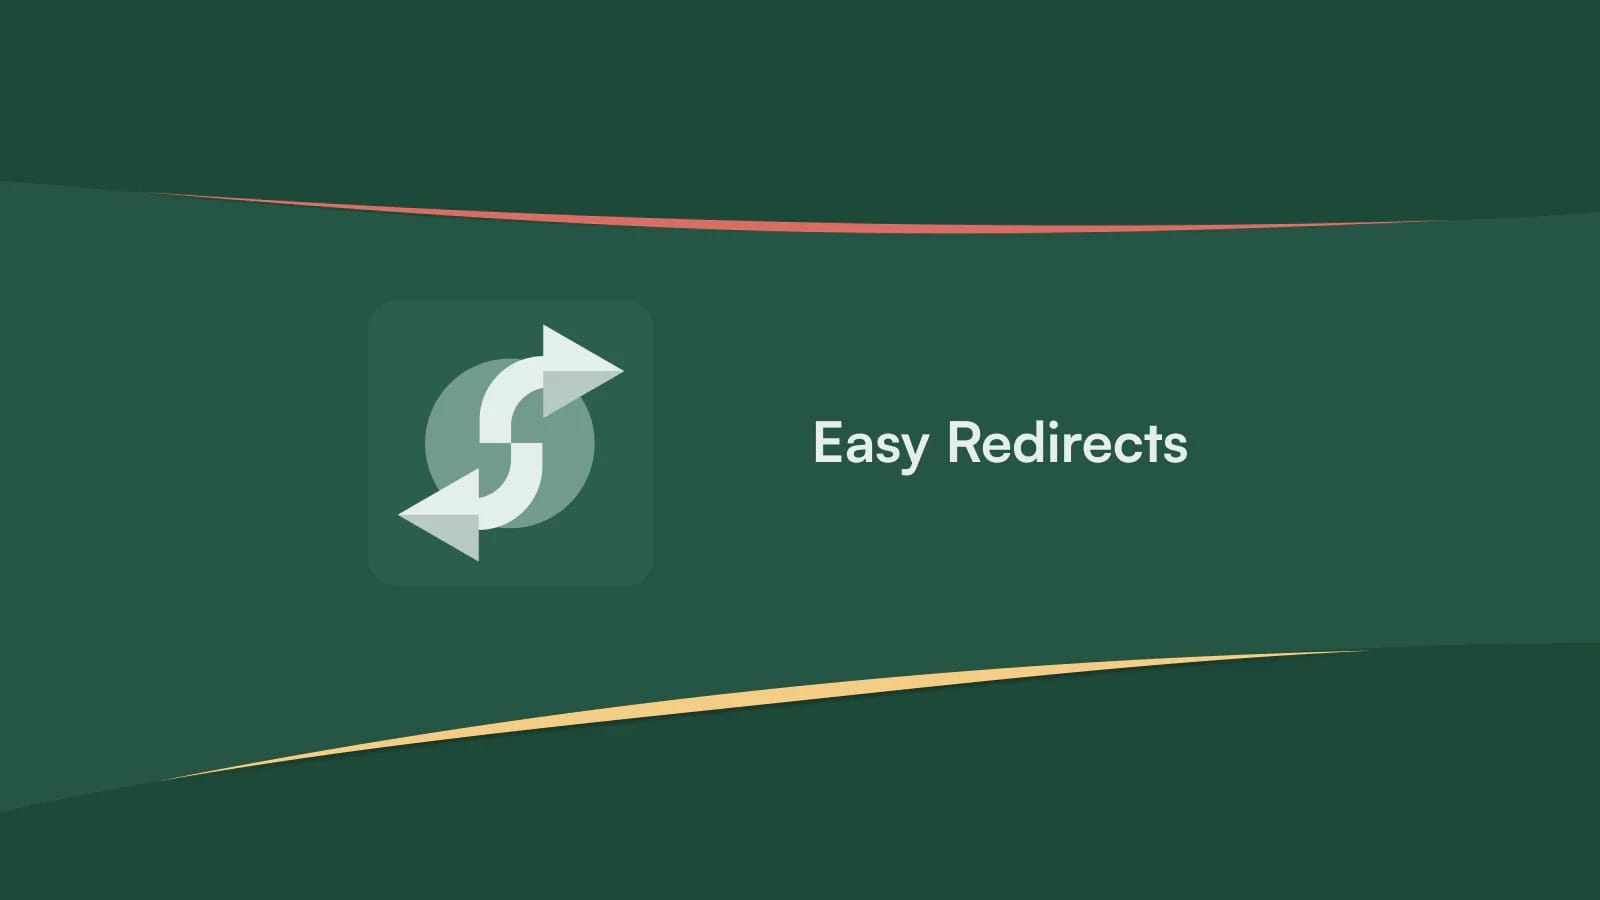 SC easy redirects